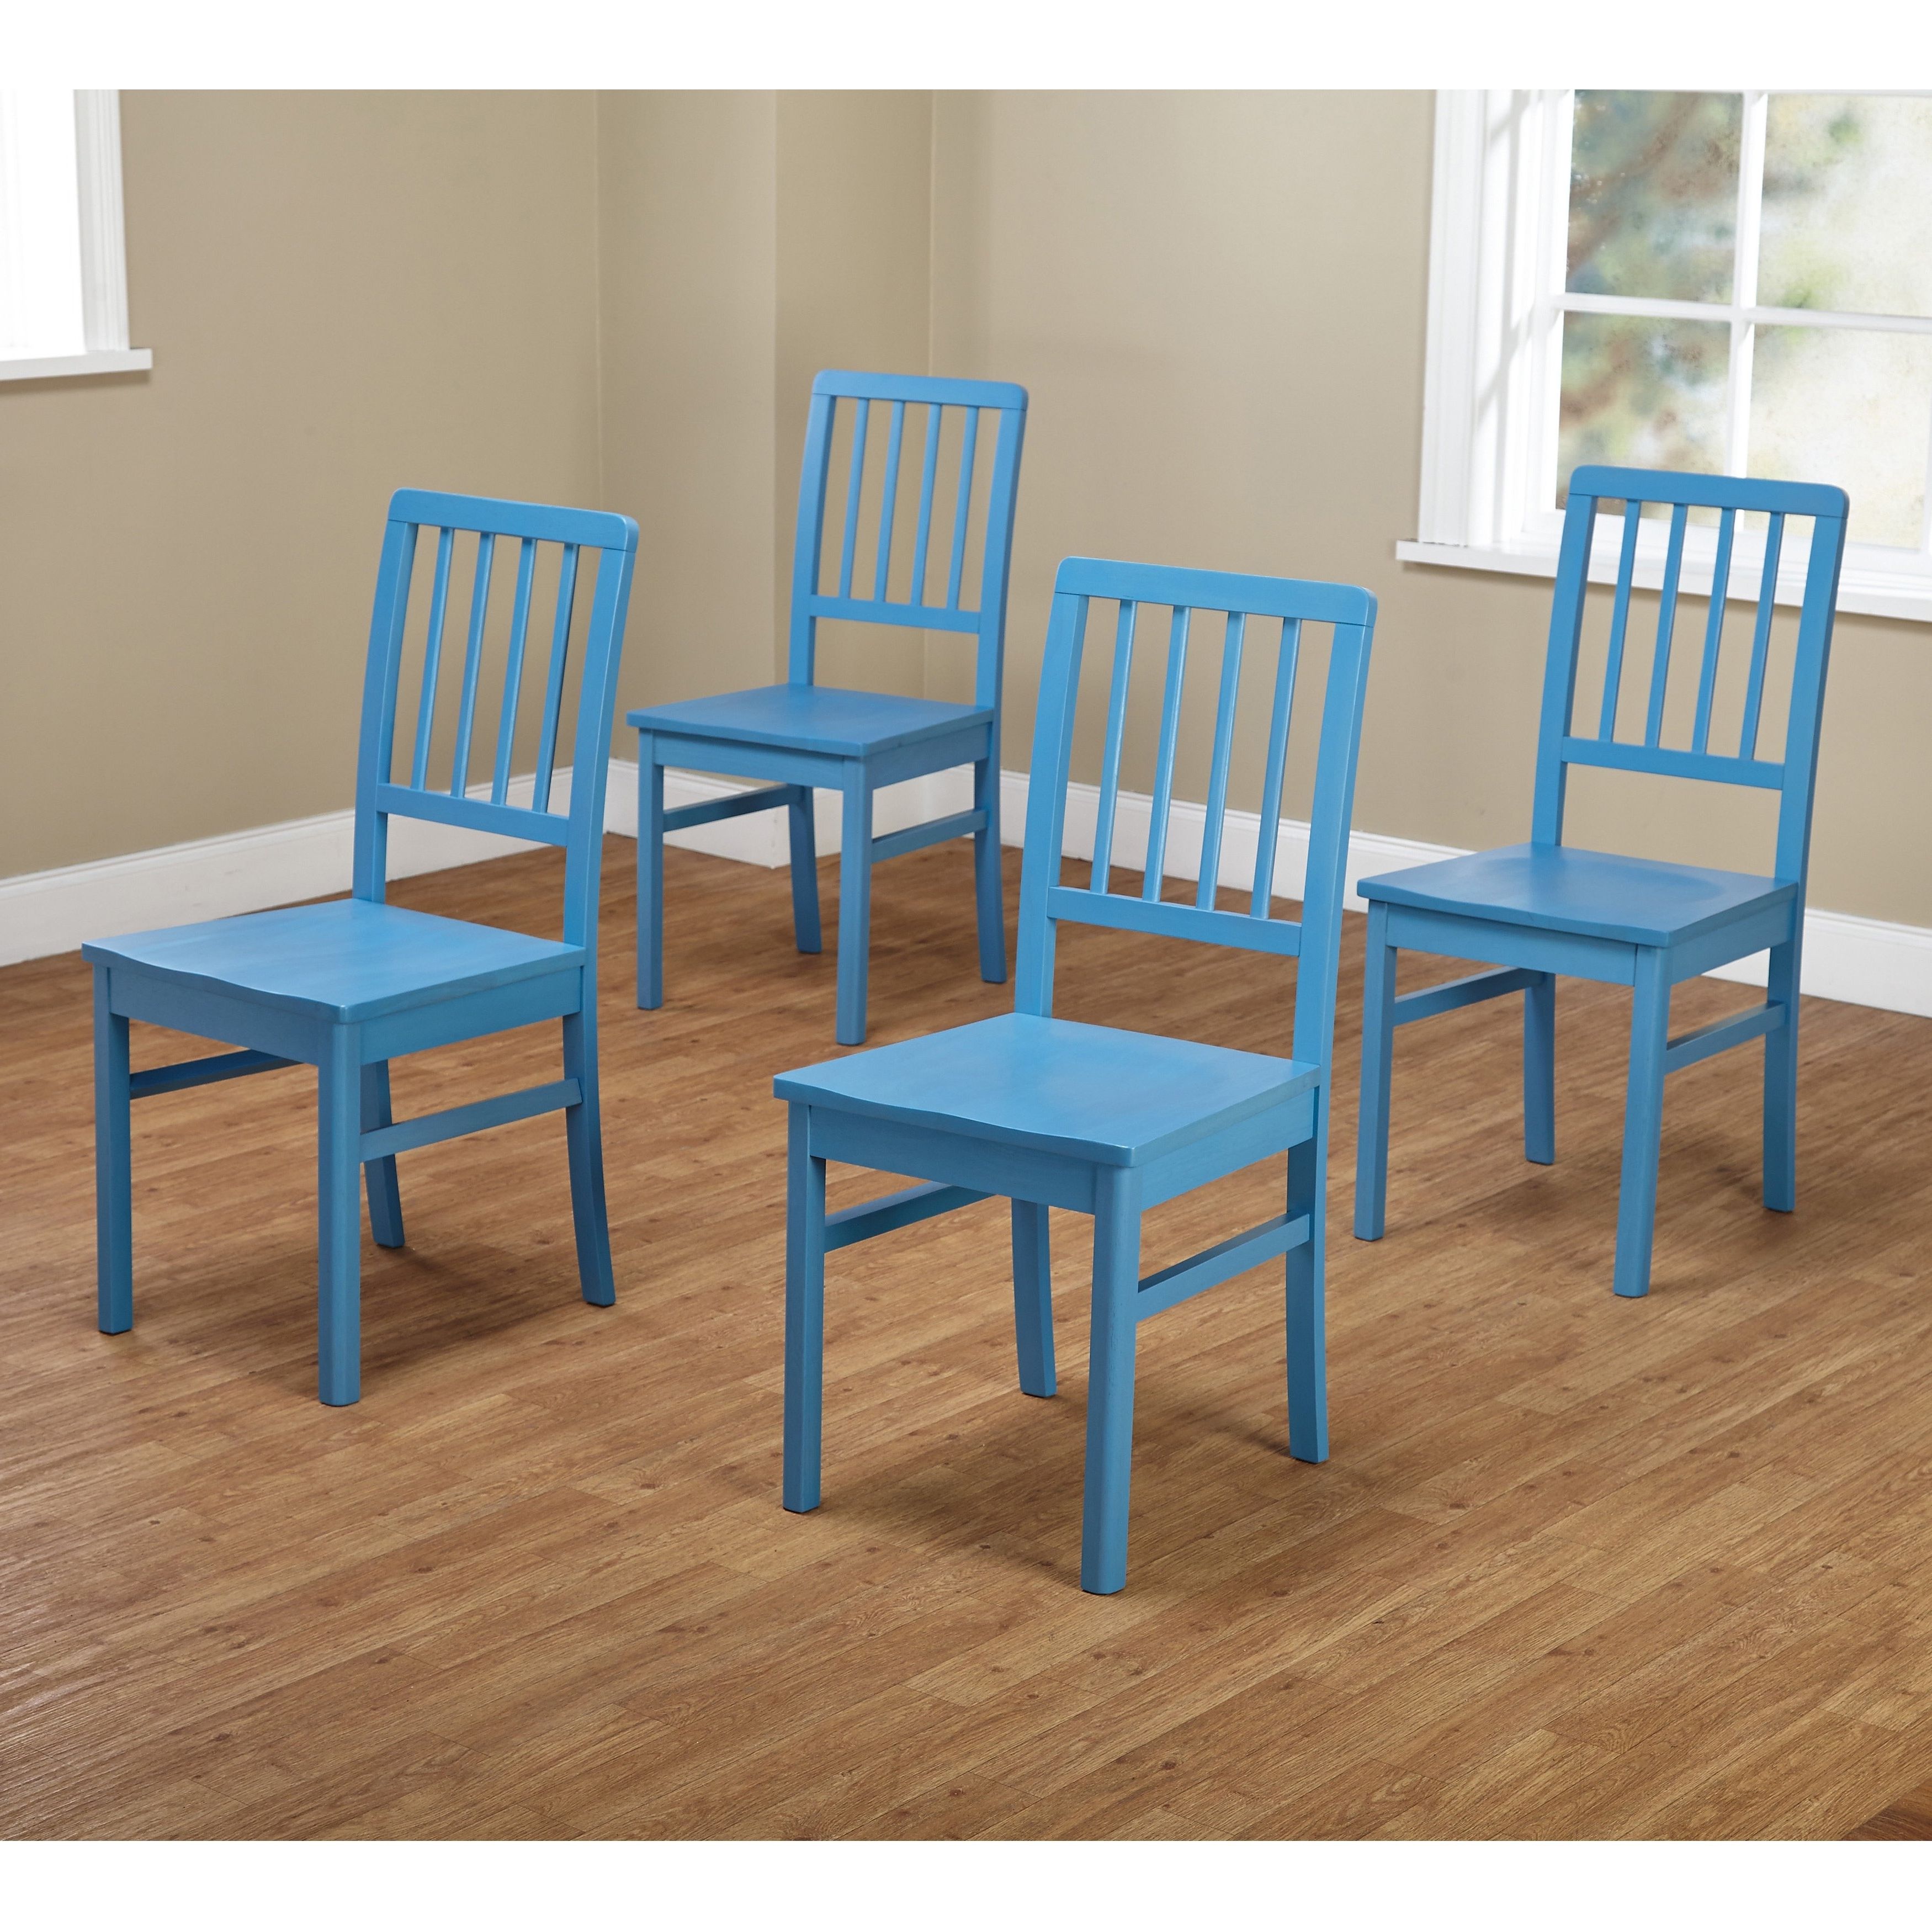 Fashionable Camden Dining Chairs With Regard To Shop Simple Living Camden Dining Chair (set Of 4) – Free Shipping (View 8 of 20)